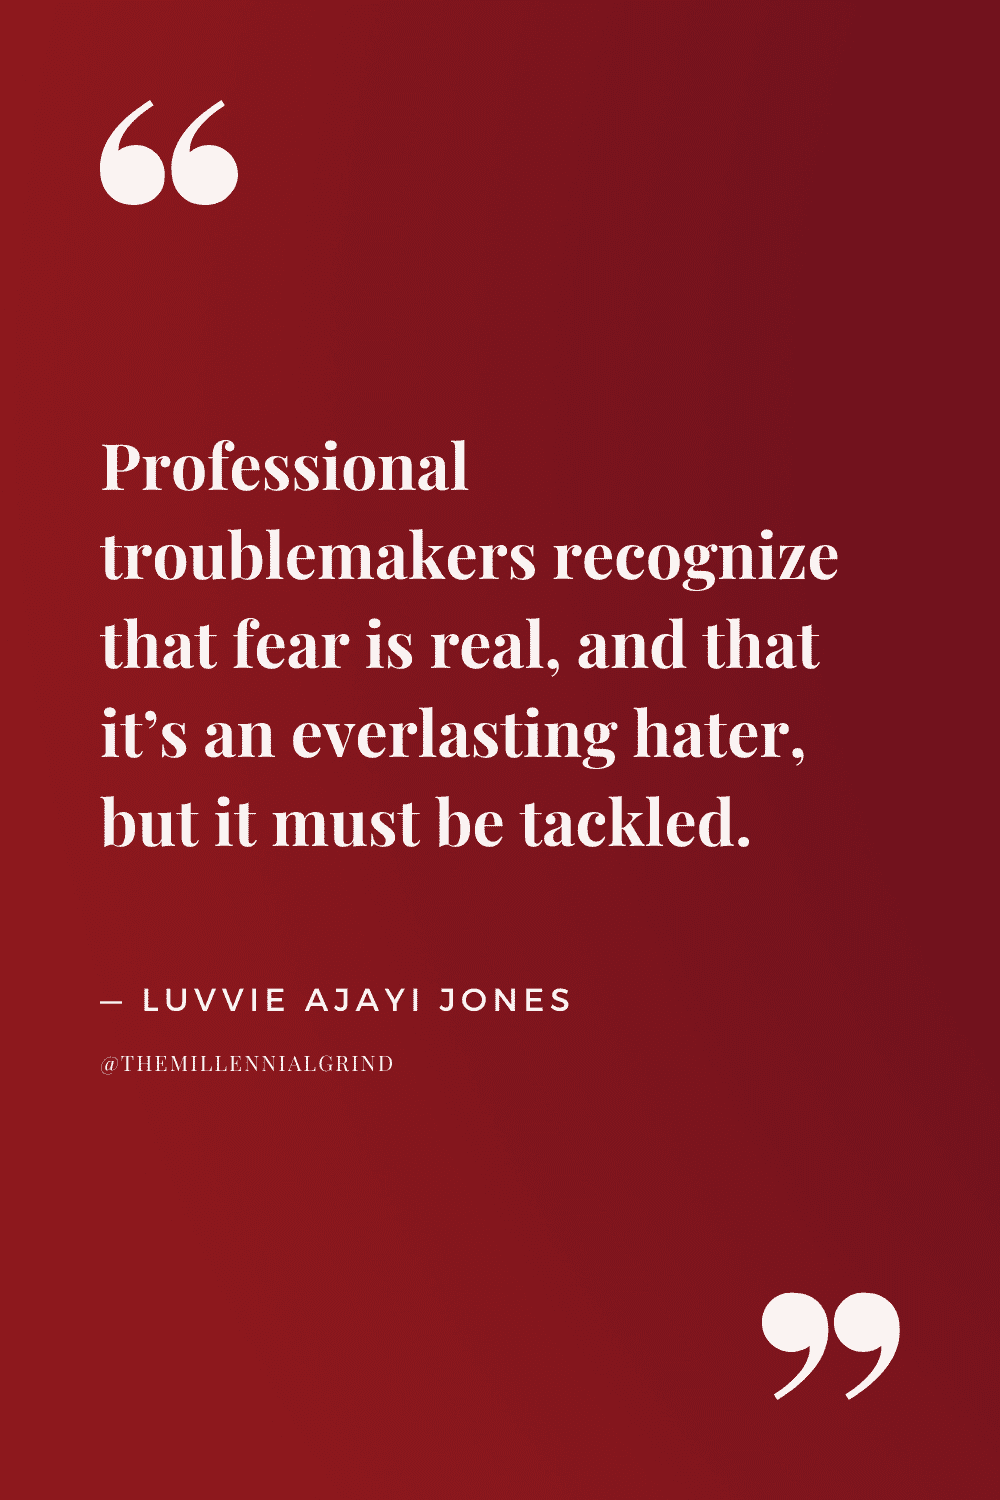 30 Quotes from Professional Troublemaker by Luvvie Ajayi Jones